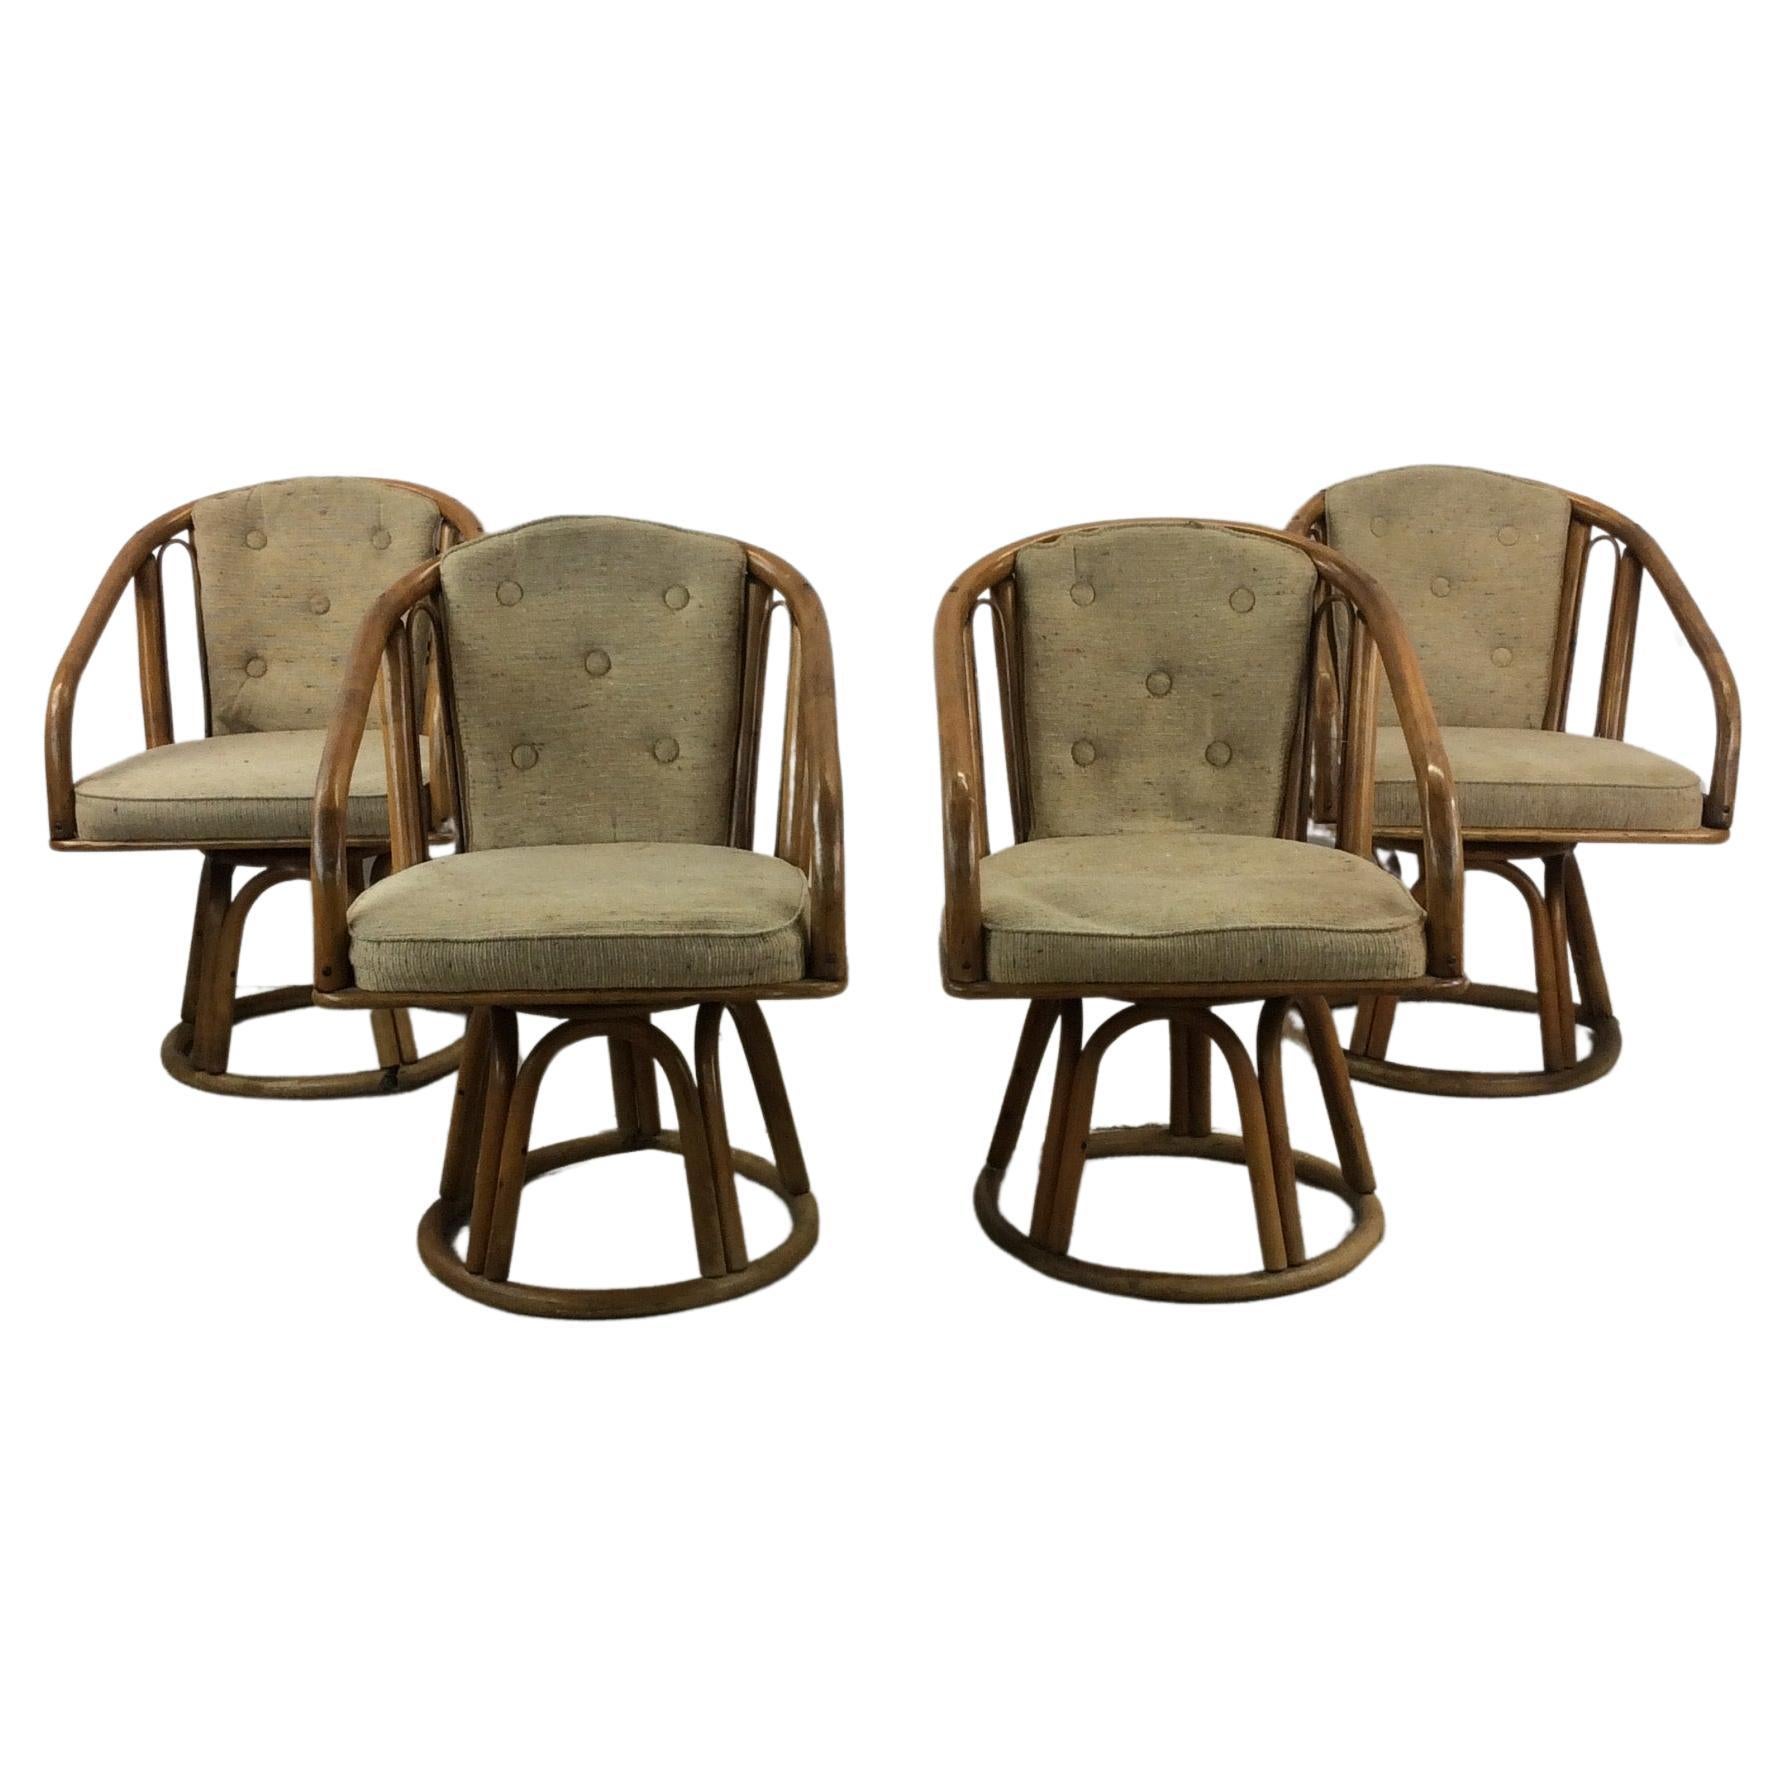 Set of 4 Vintage Rattan Chairs with Swivel Base For Sale